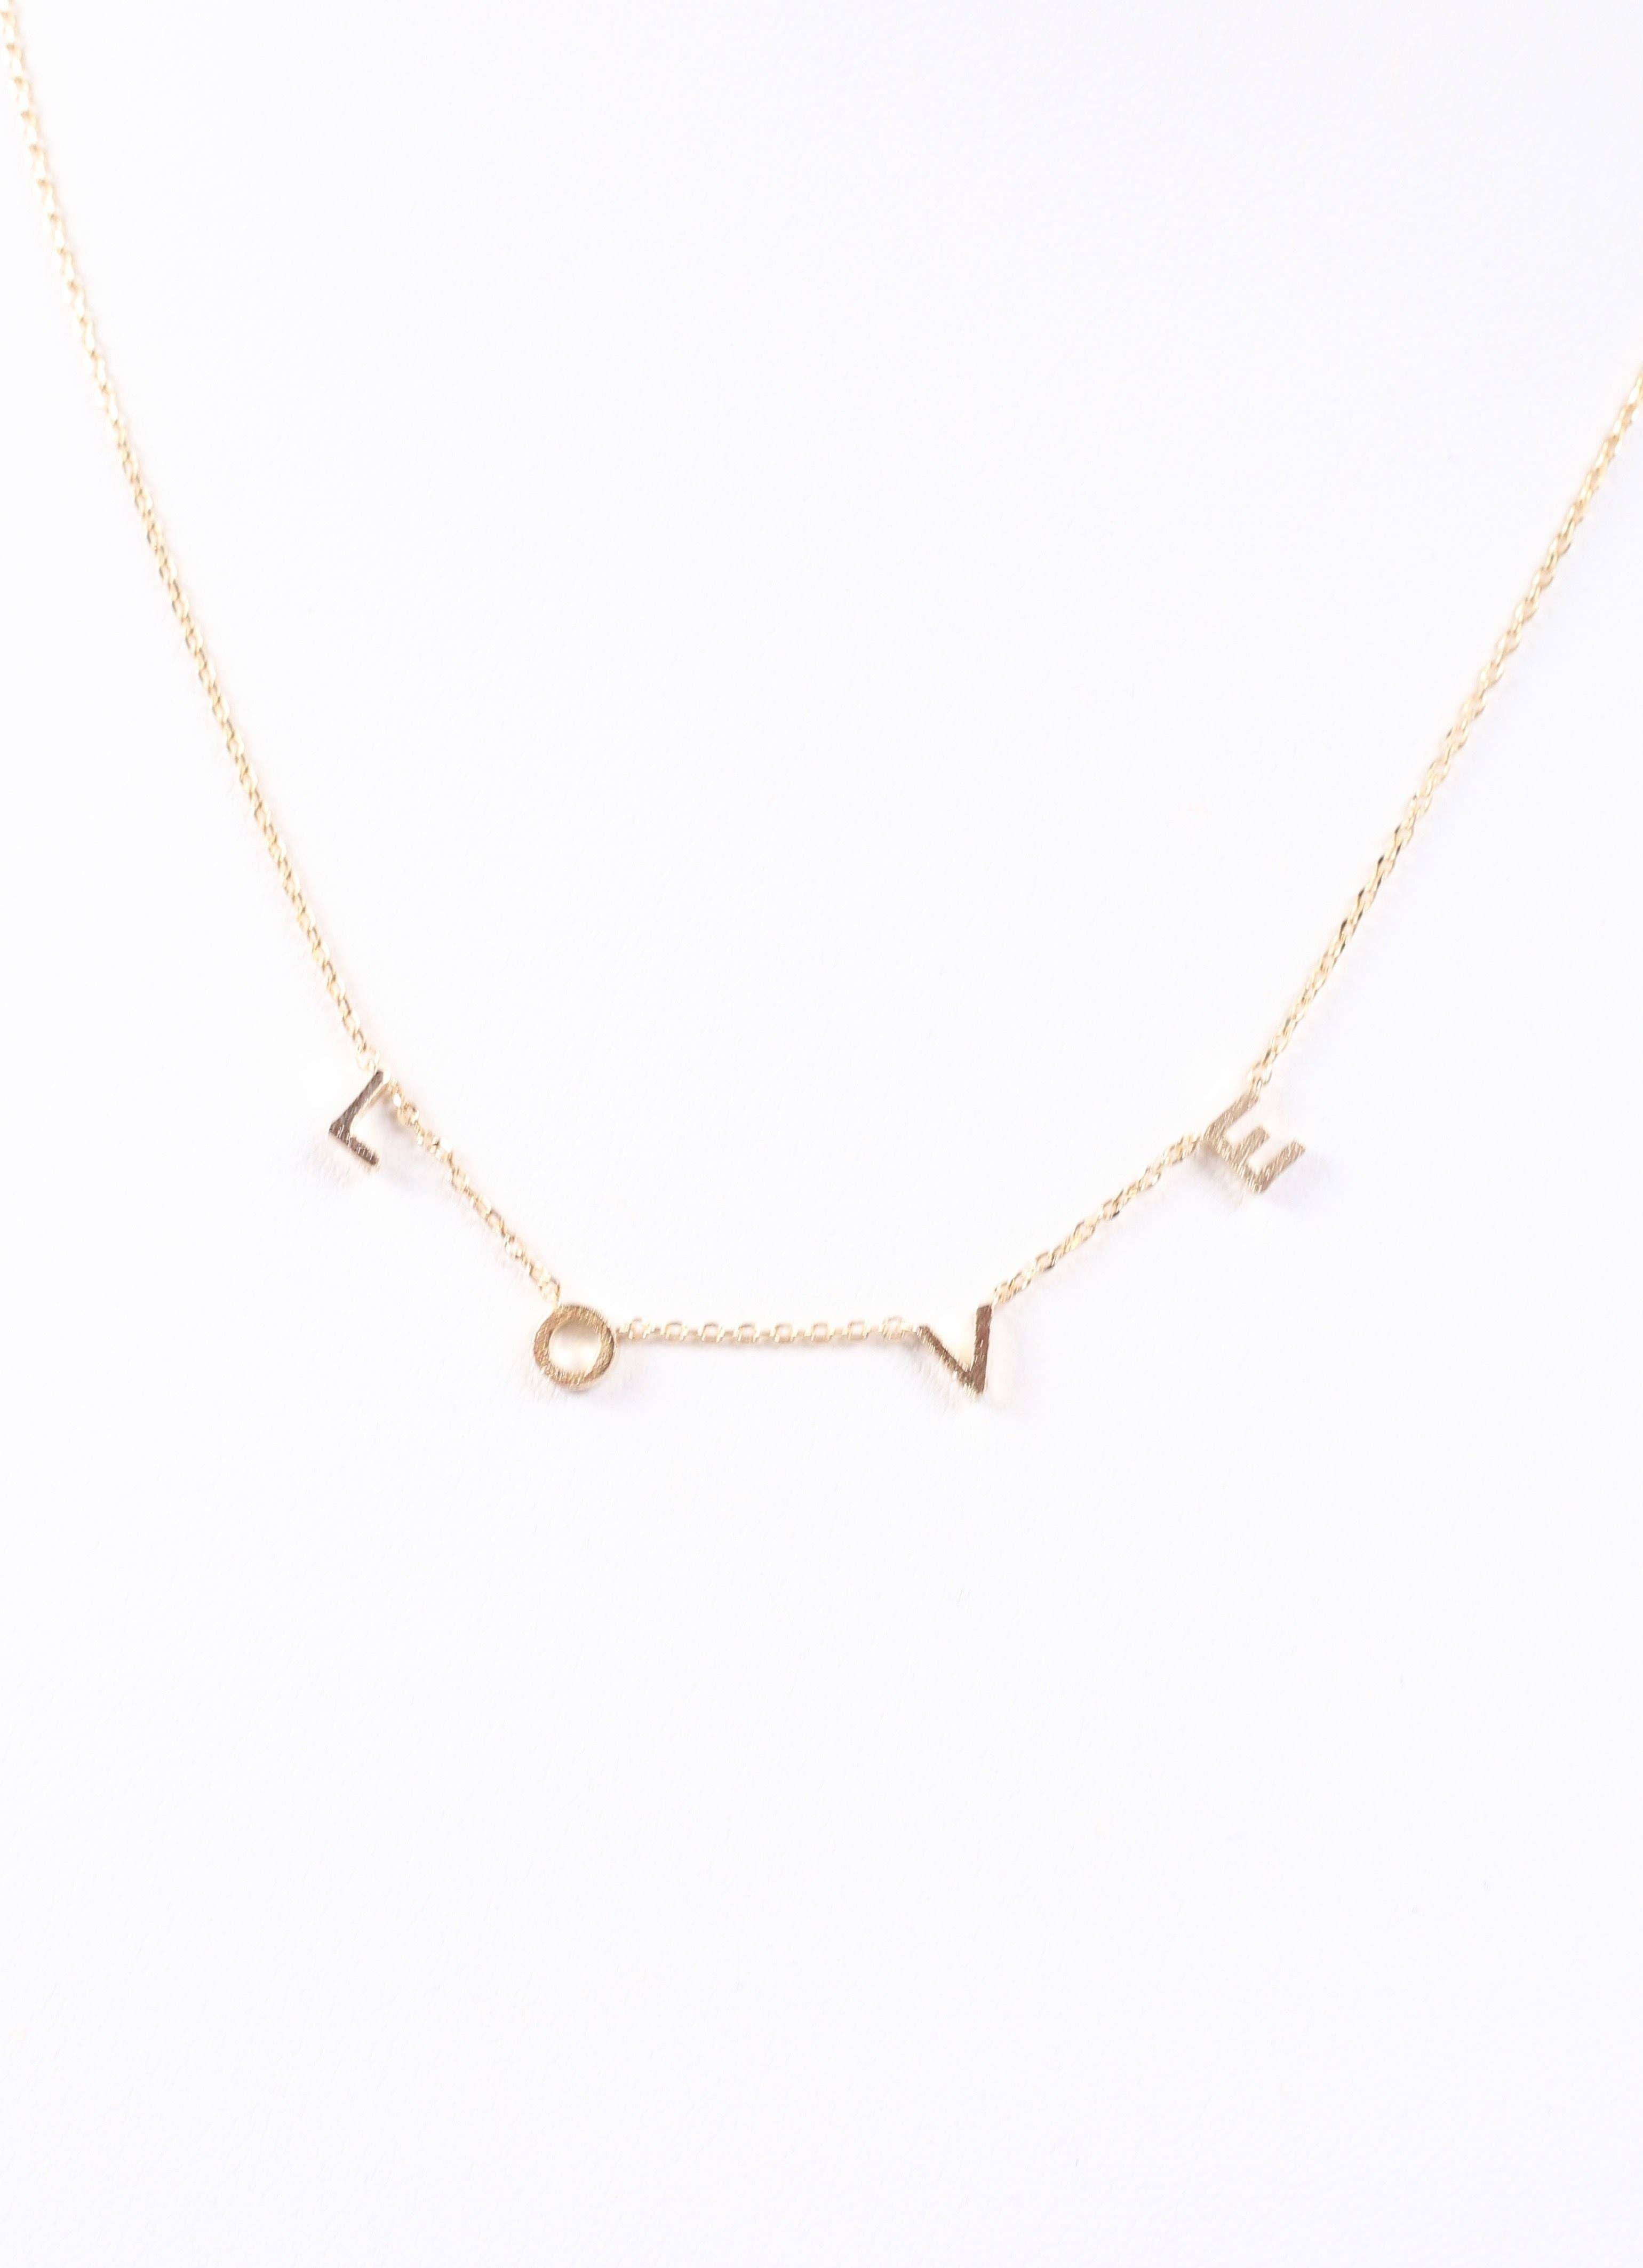 Love Station Necklace in Gold